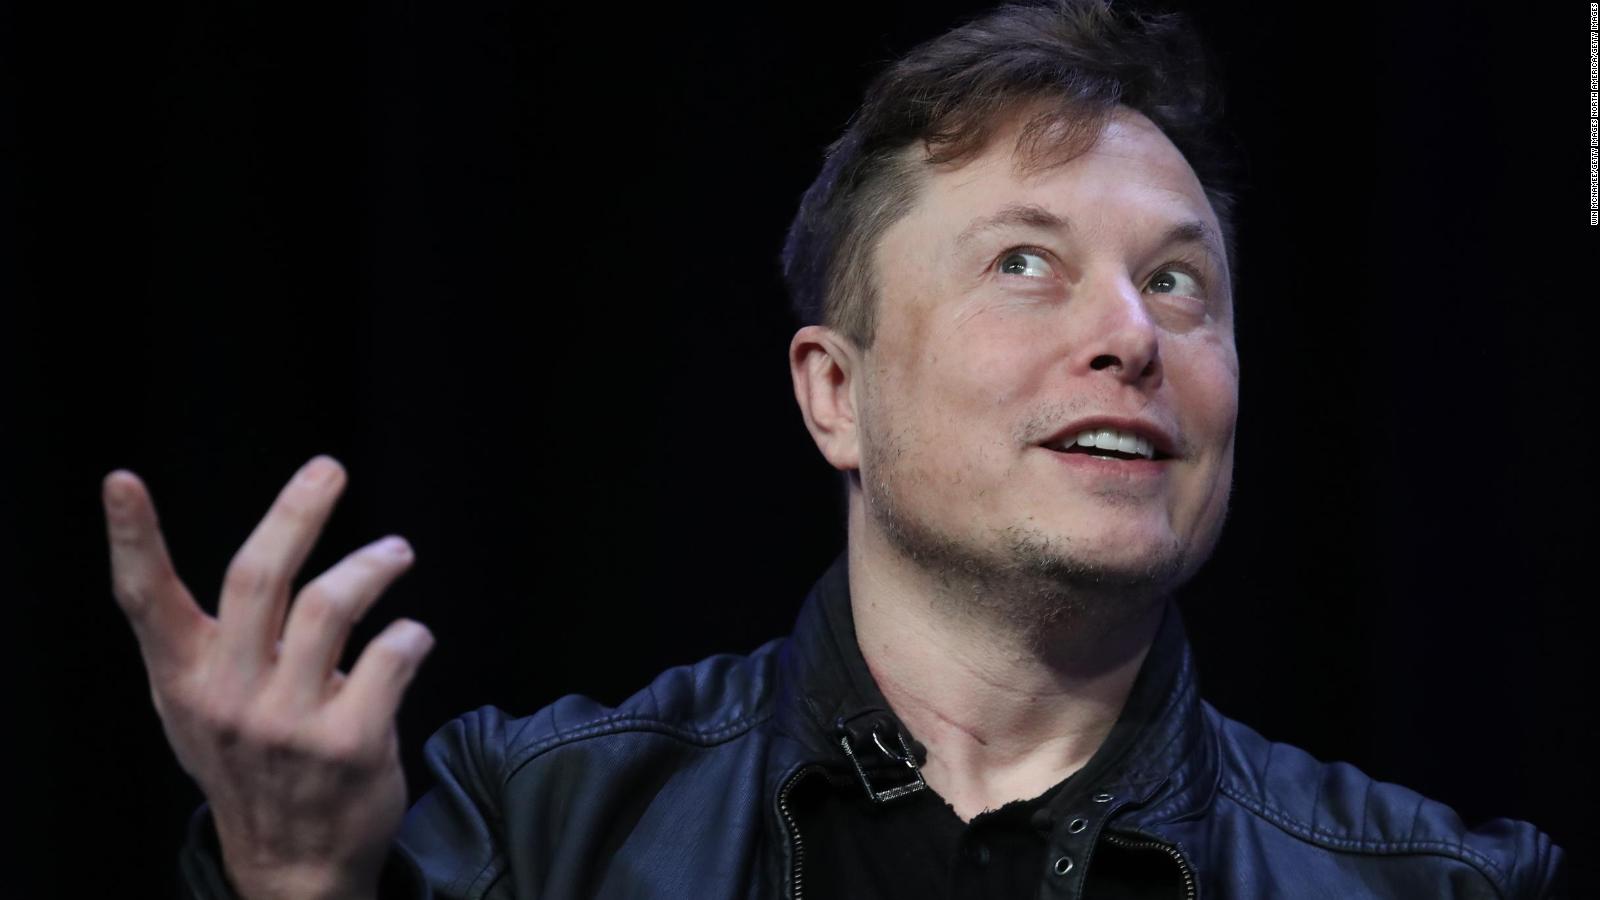 Tech analysts divided over Elon Musk’s offer for Twitter